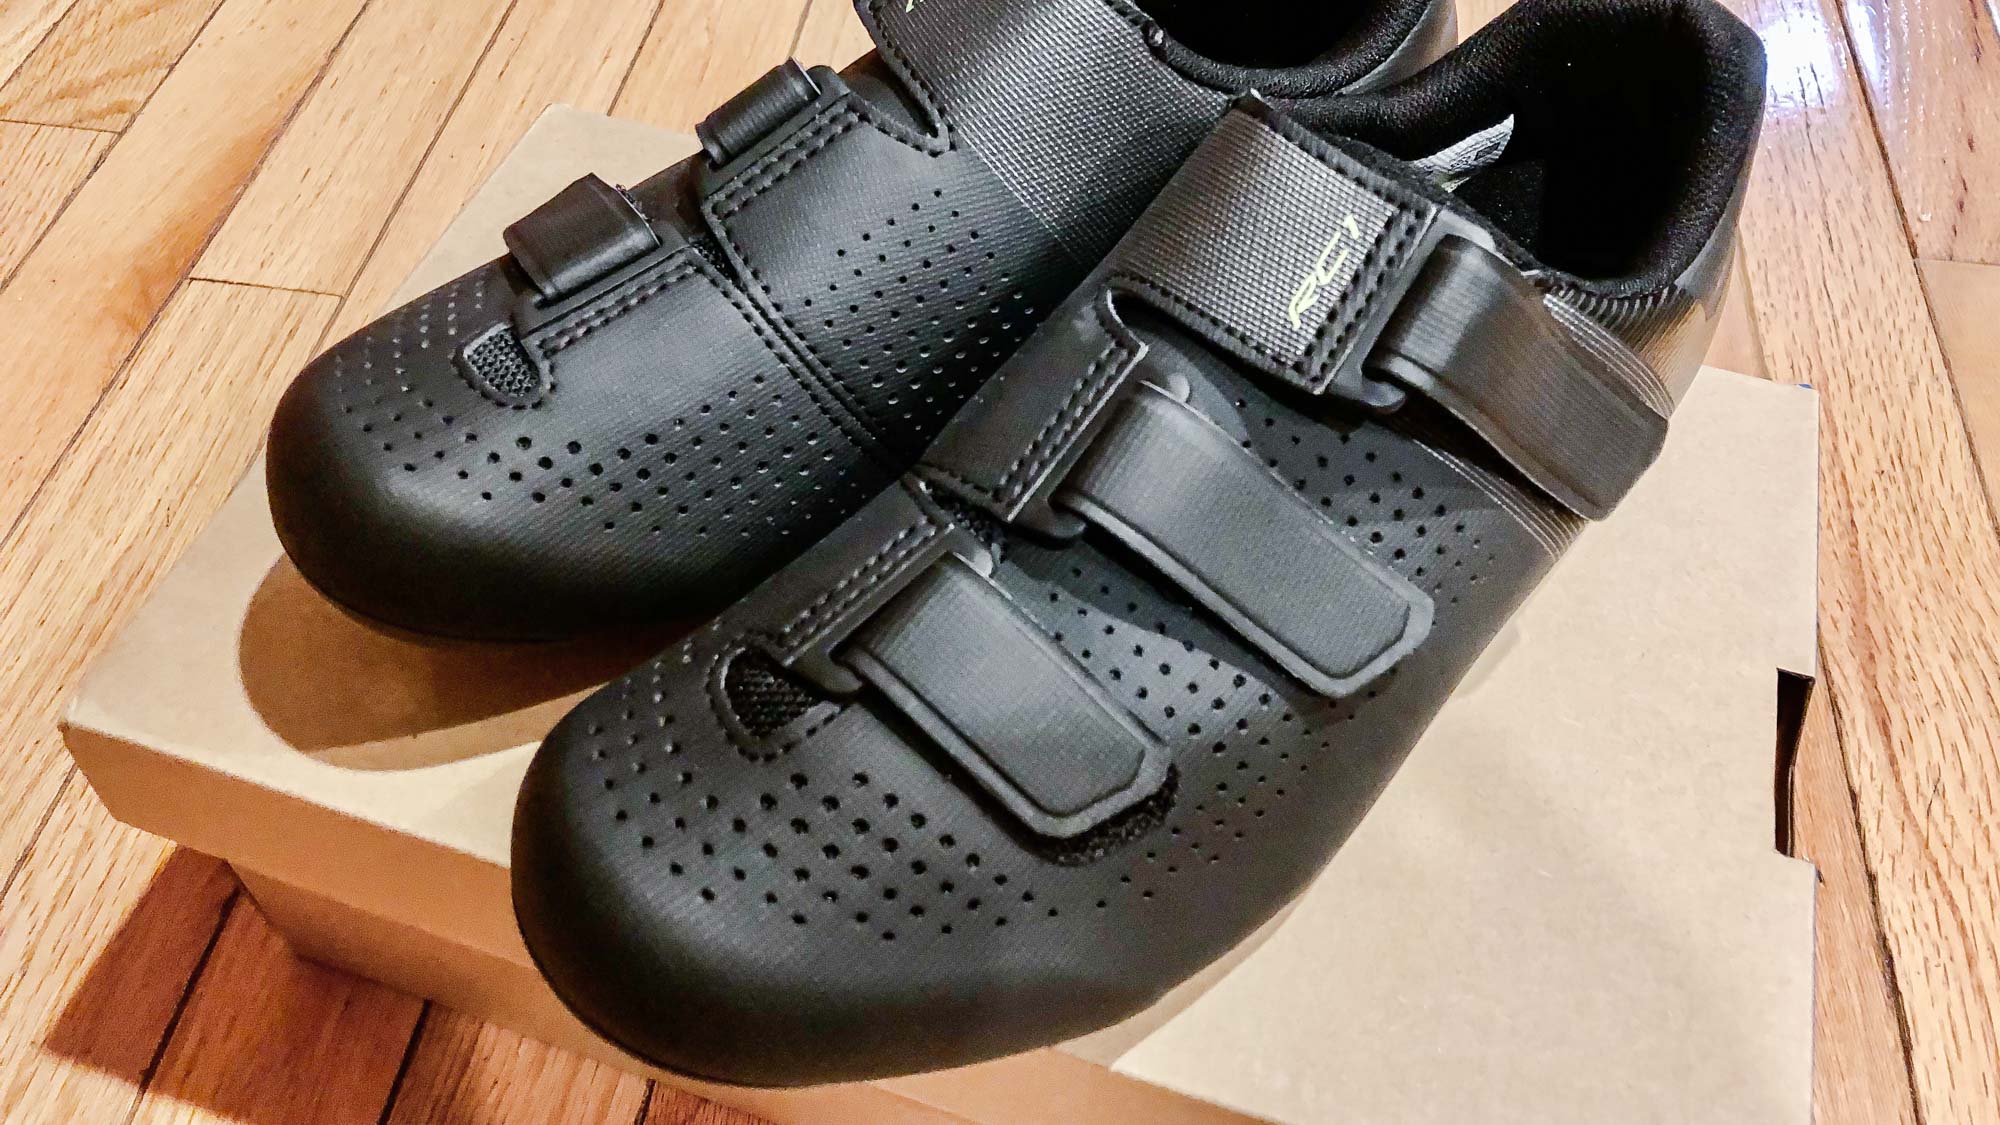 Shimano RC1 cycling shoes review | Tom's Guide